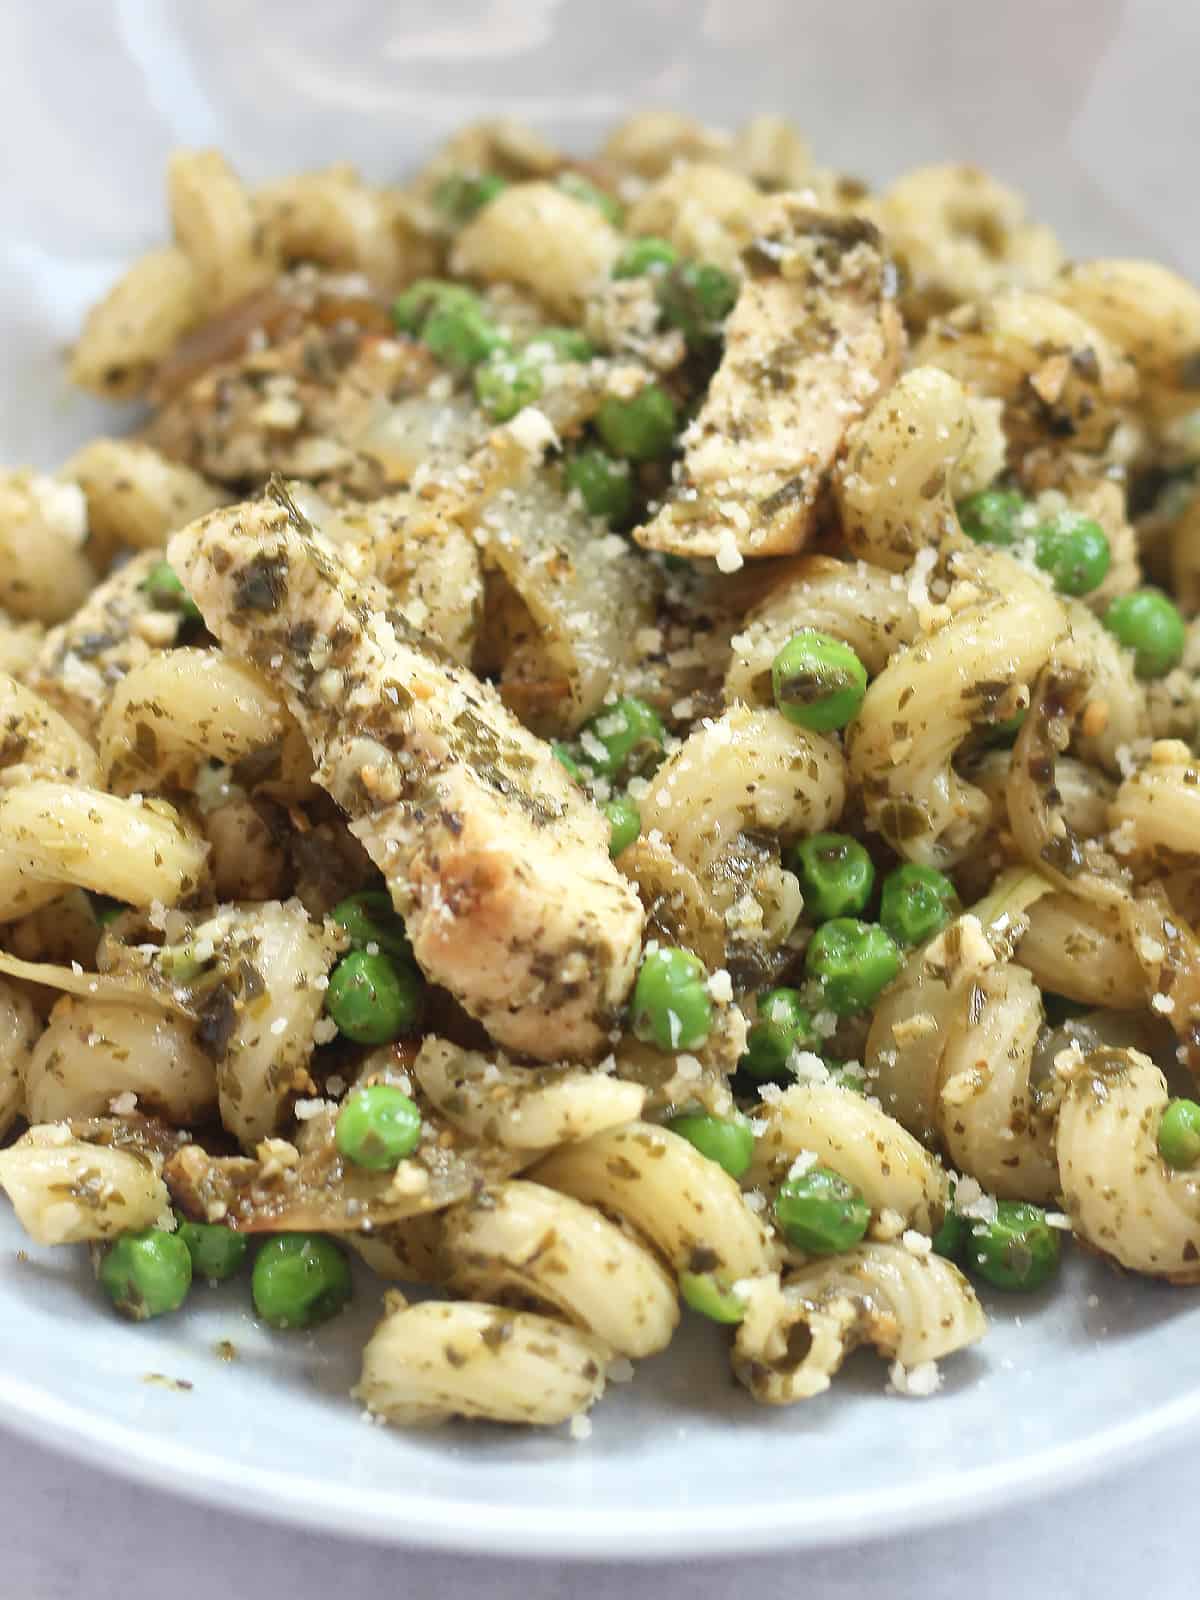 Pieces of cooked chicken breast tossed in pesto pasta.